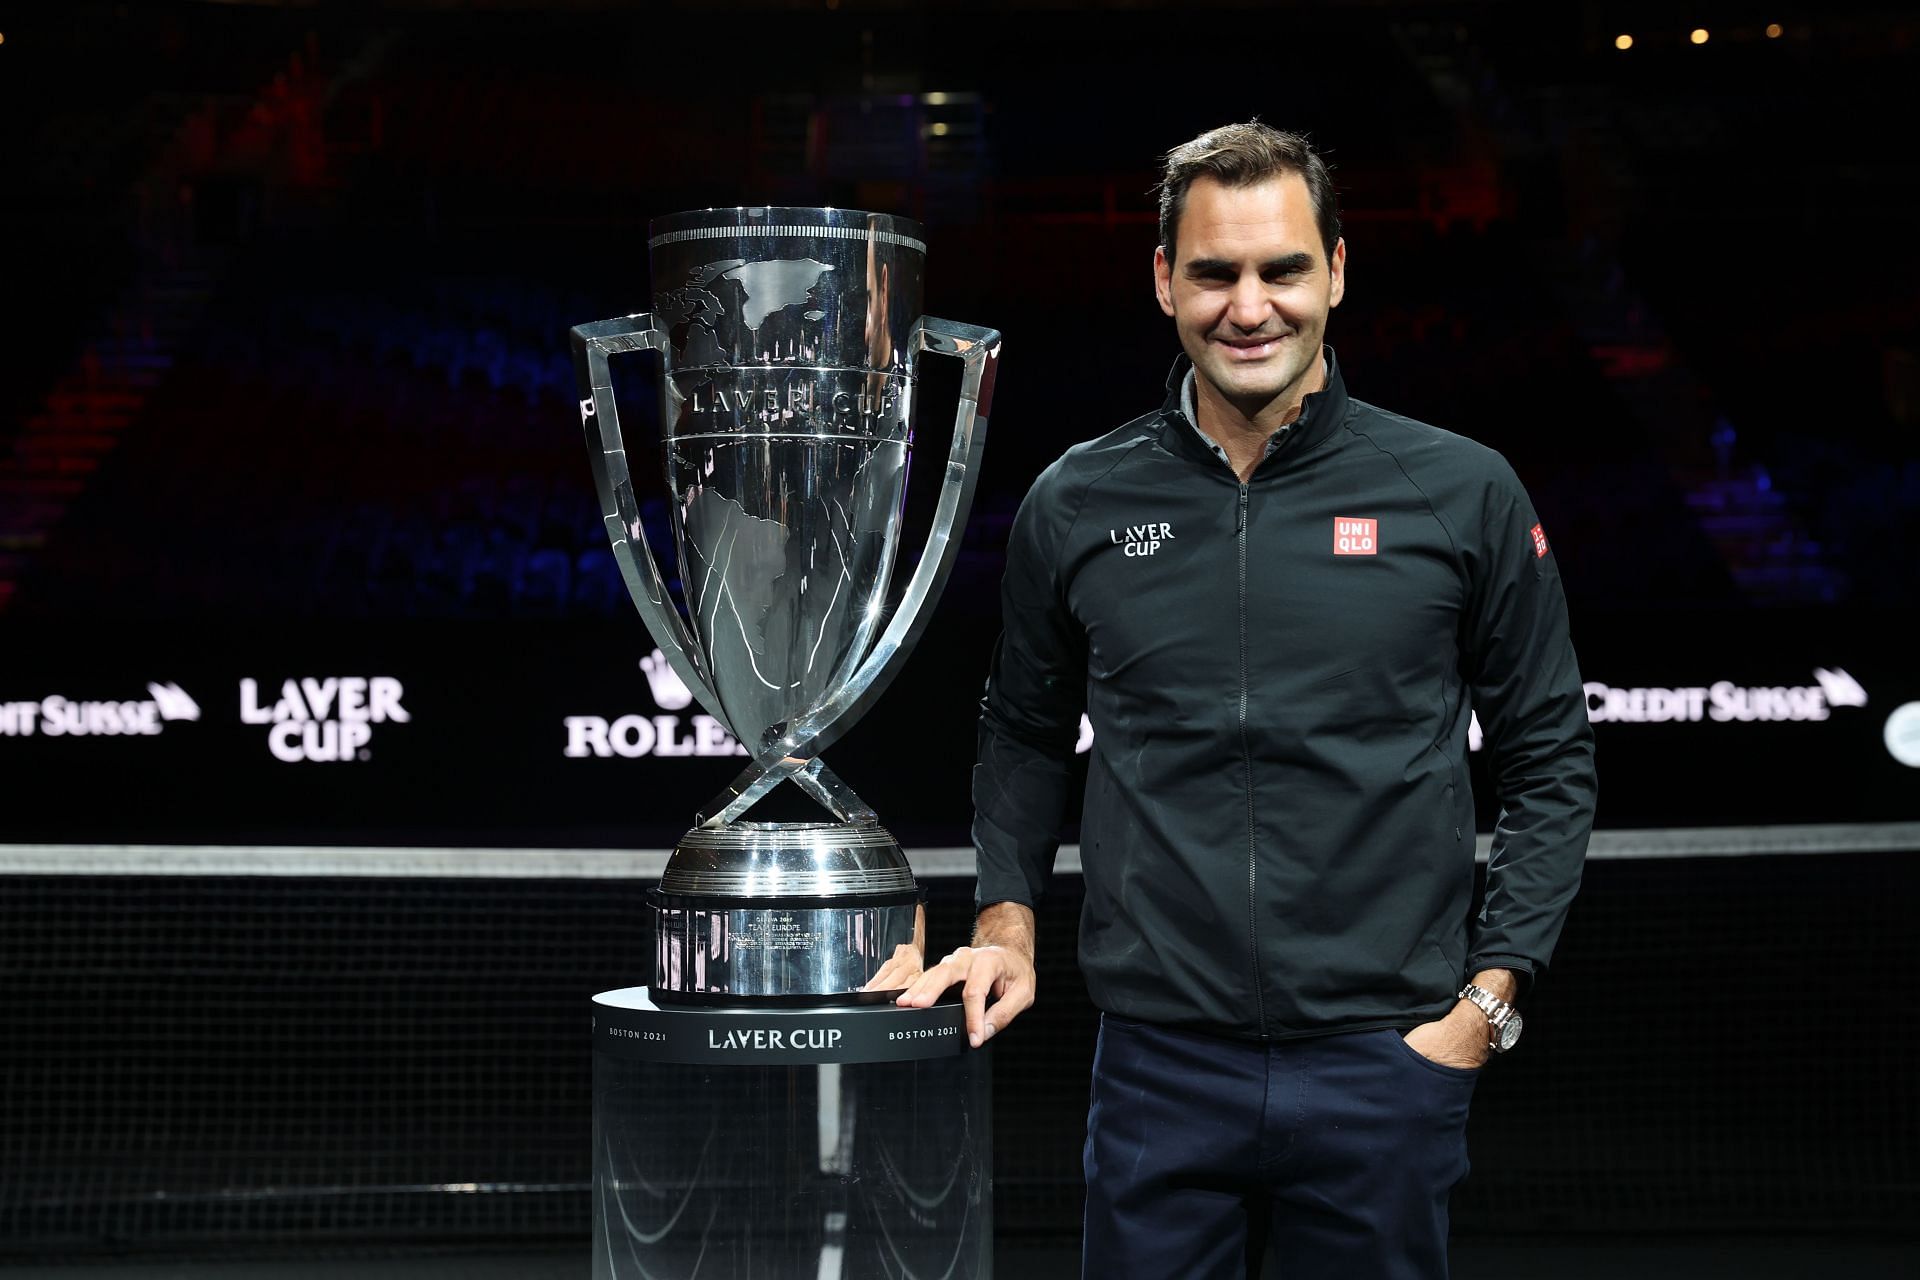 Laver Cup 2022 Where to watch, TV schedule, live streaming details and more